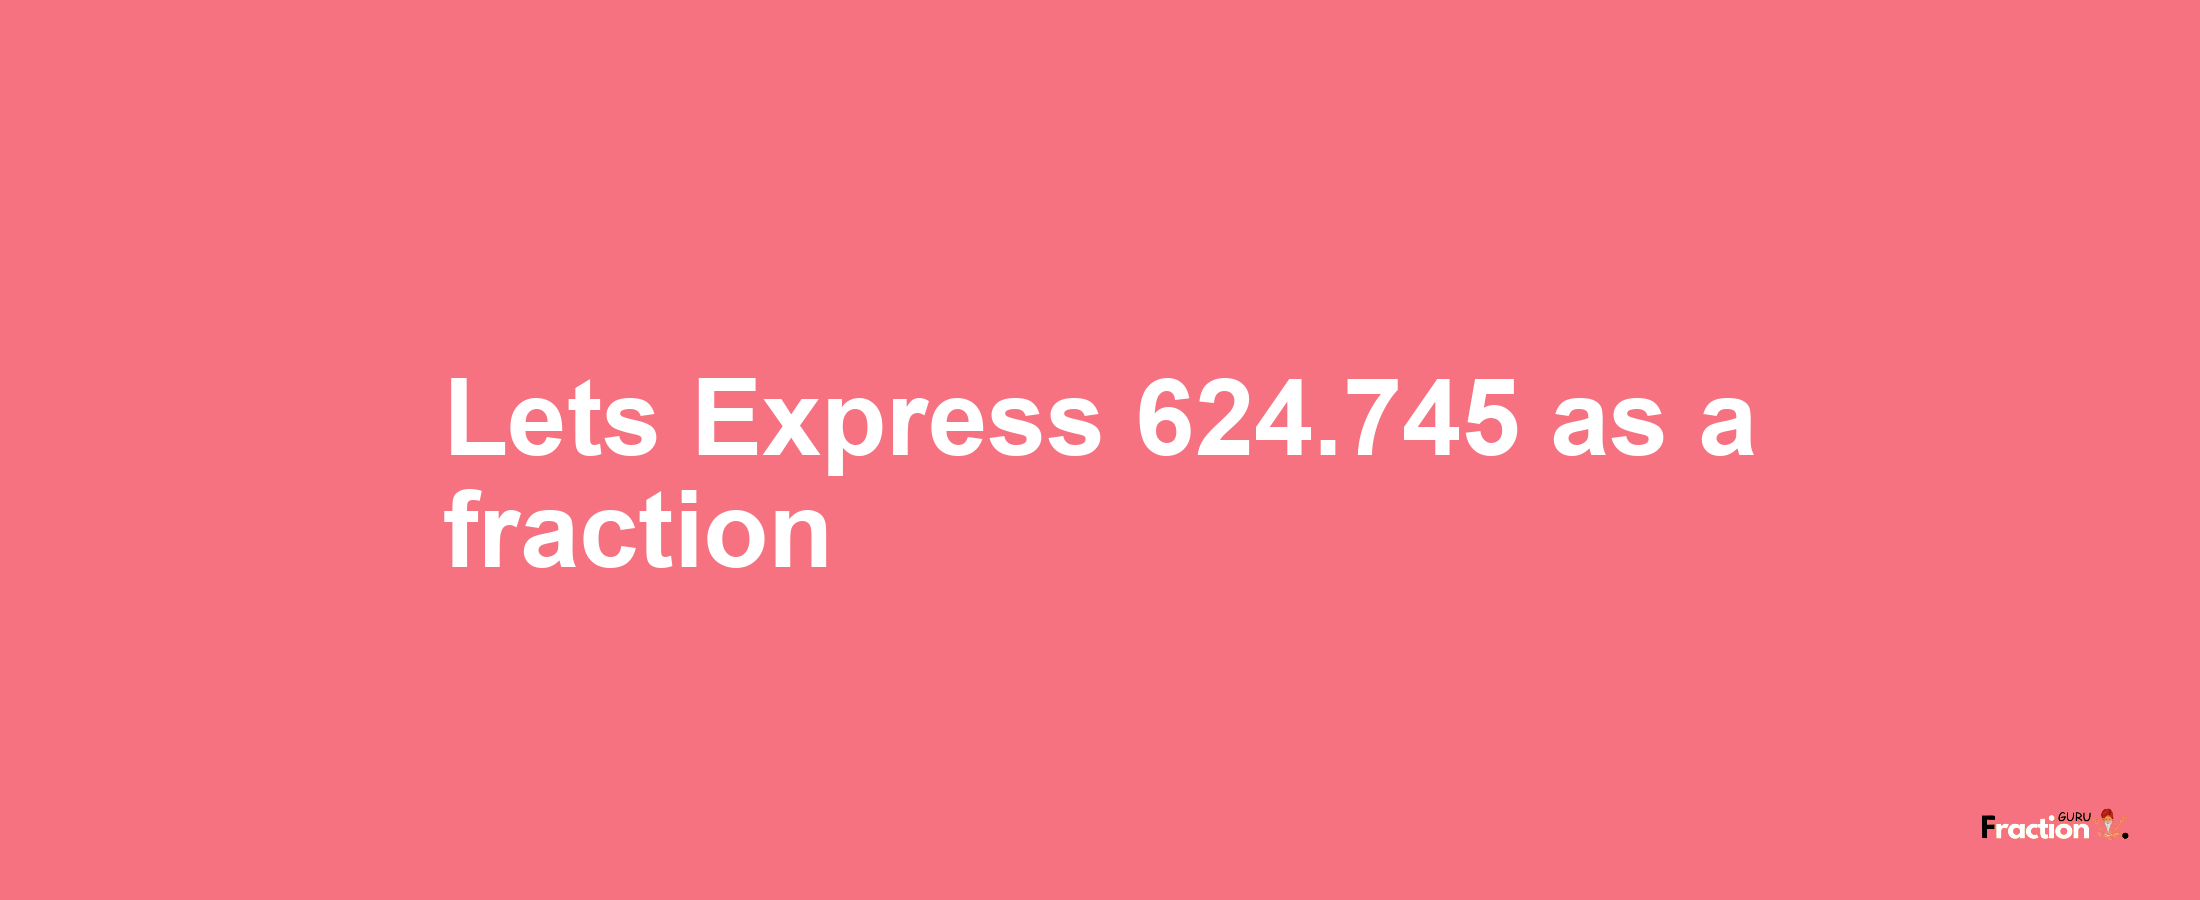 Lets Express 624.745 as afraction